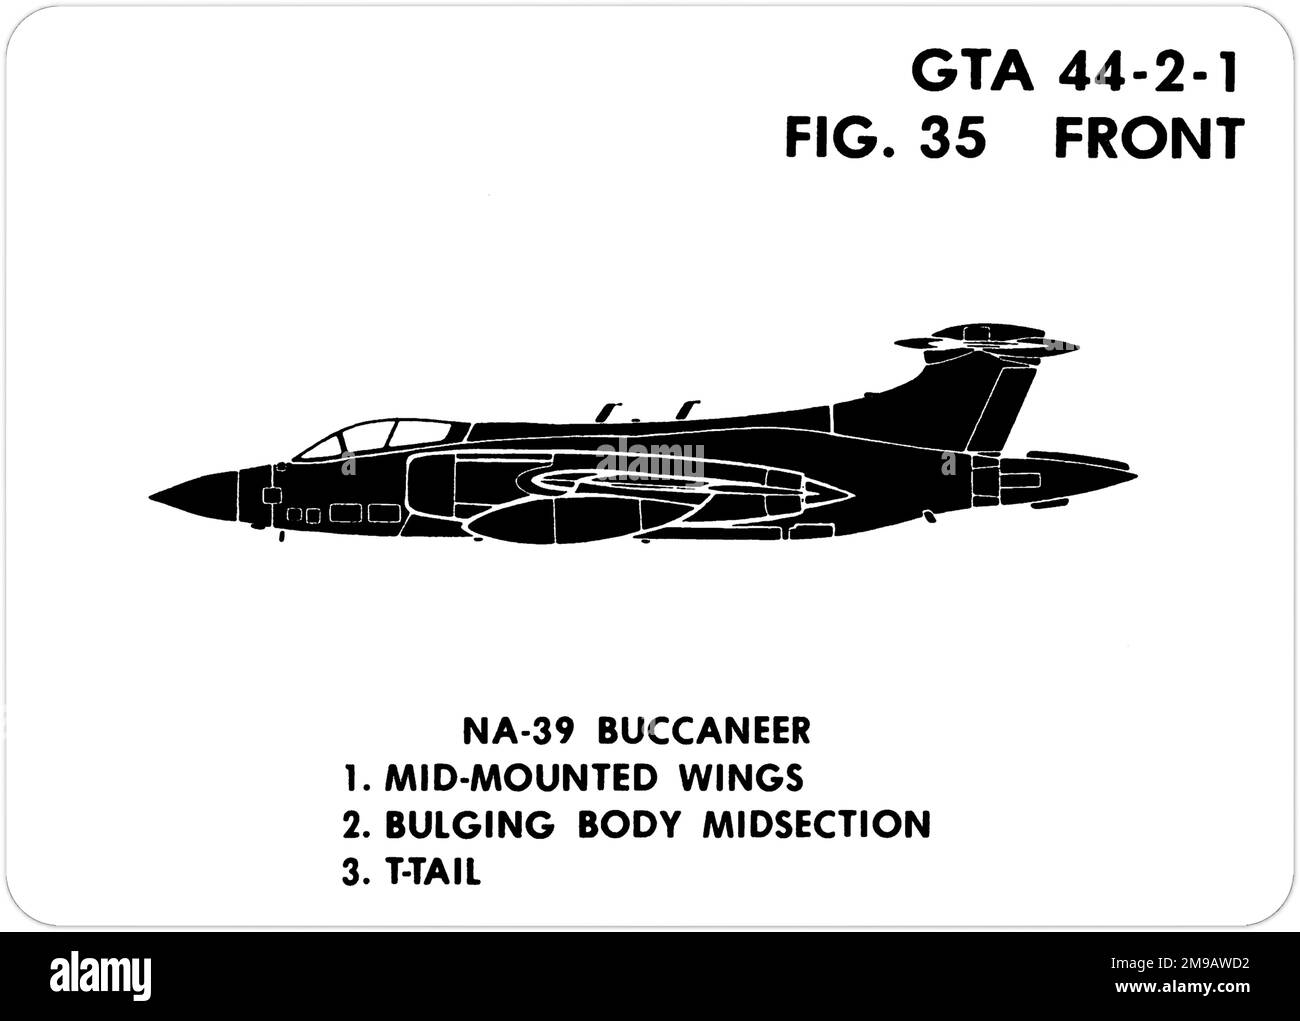 Hawker Siddeley Buccaneer S.2. This is one of the series of Graphics Training Aids (GTA) used by the United States Army to train their personnel to recognize friendly and hostile aircraft. This particular set, GTA 44-2-1, was issued in July1977. The set features aircraft from: Canada, Italy, United Kingdom, United States, and the USSR. Stock Photo